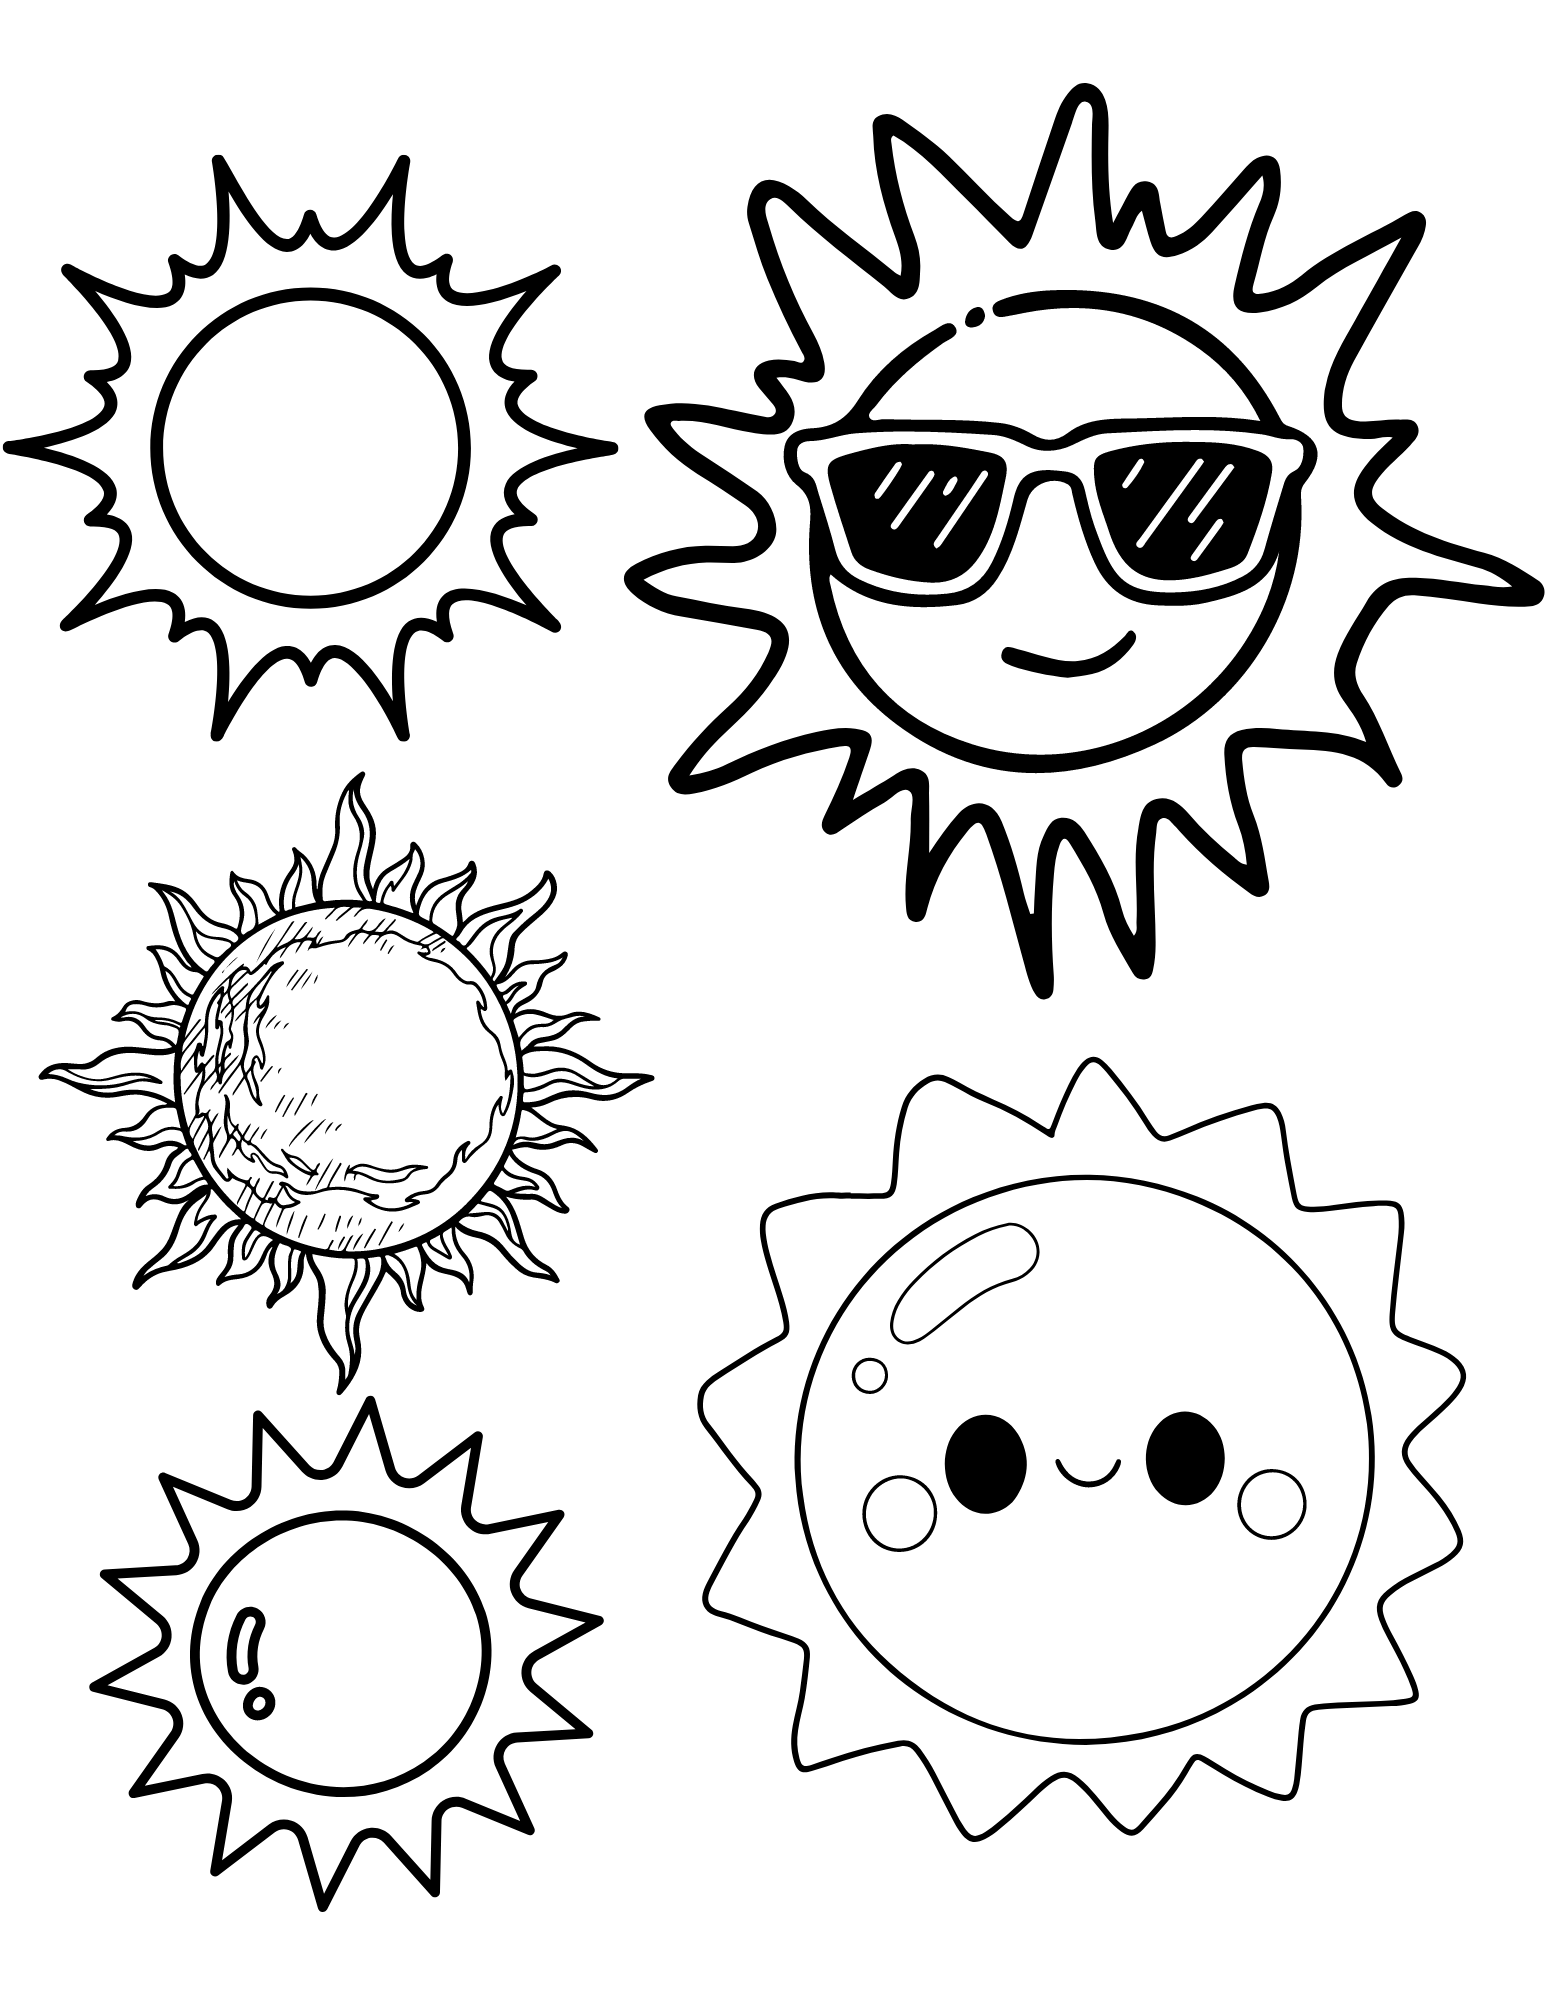 Free printable sun coloring pages for kids and adults